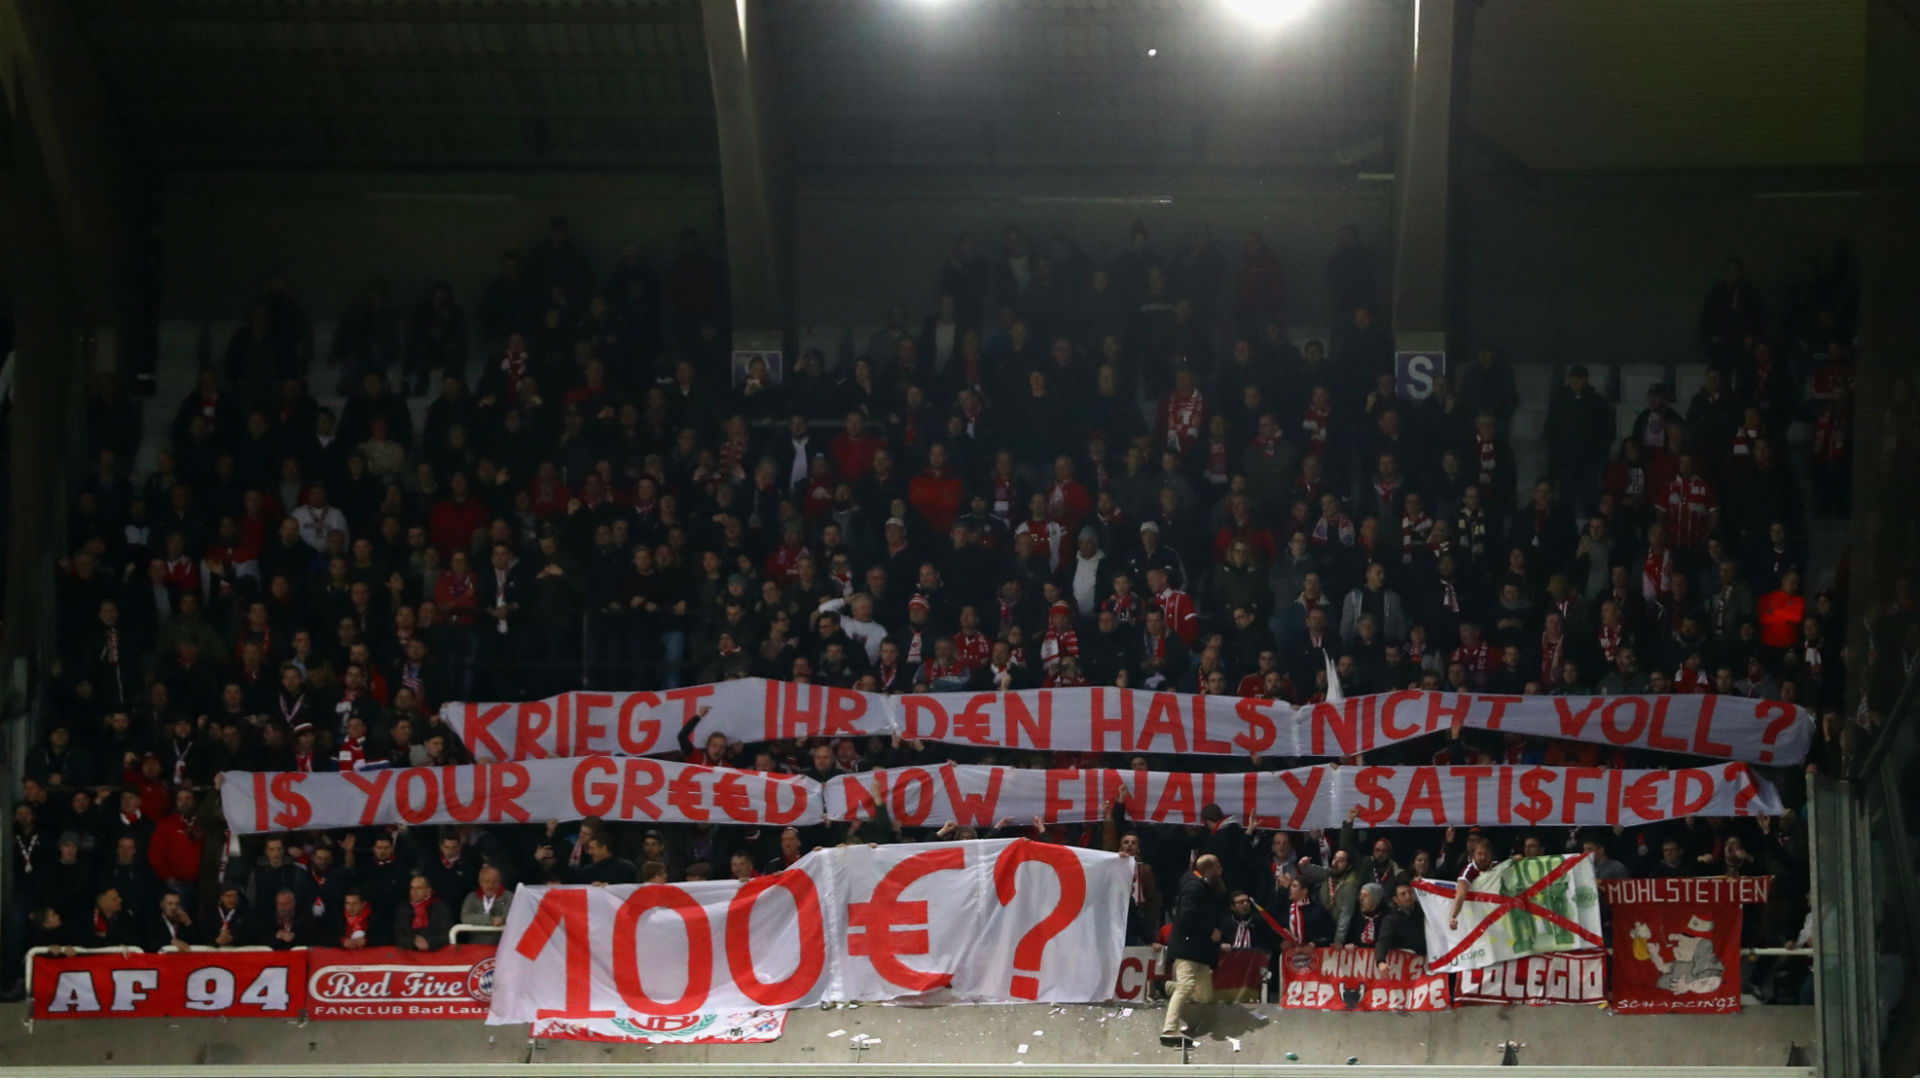 UEFA Investigate Bayern Munich After Fan Protest During Champions League Game